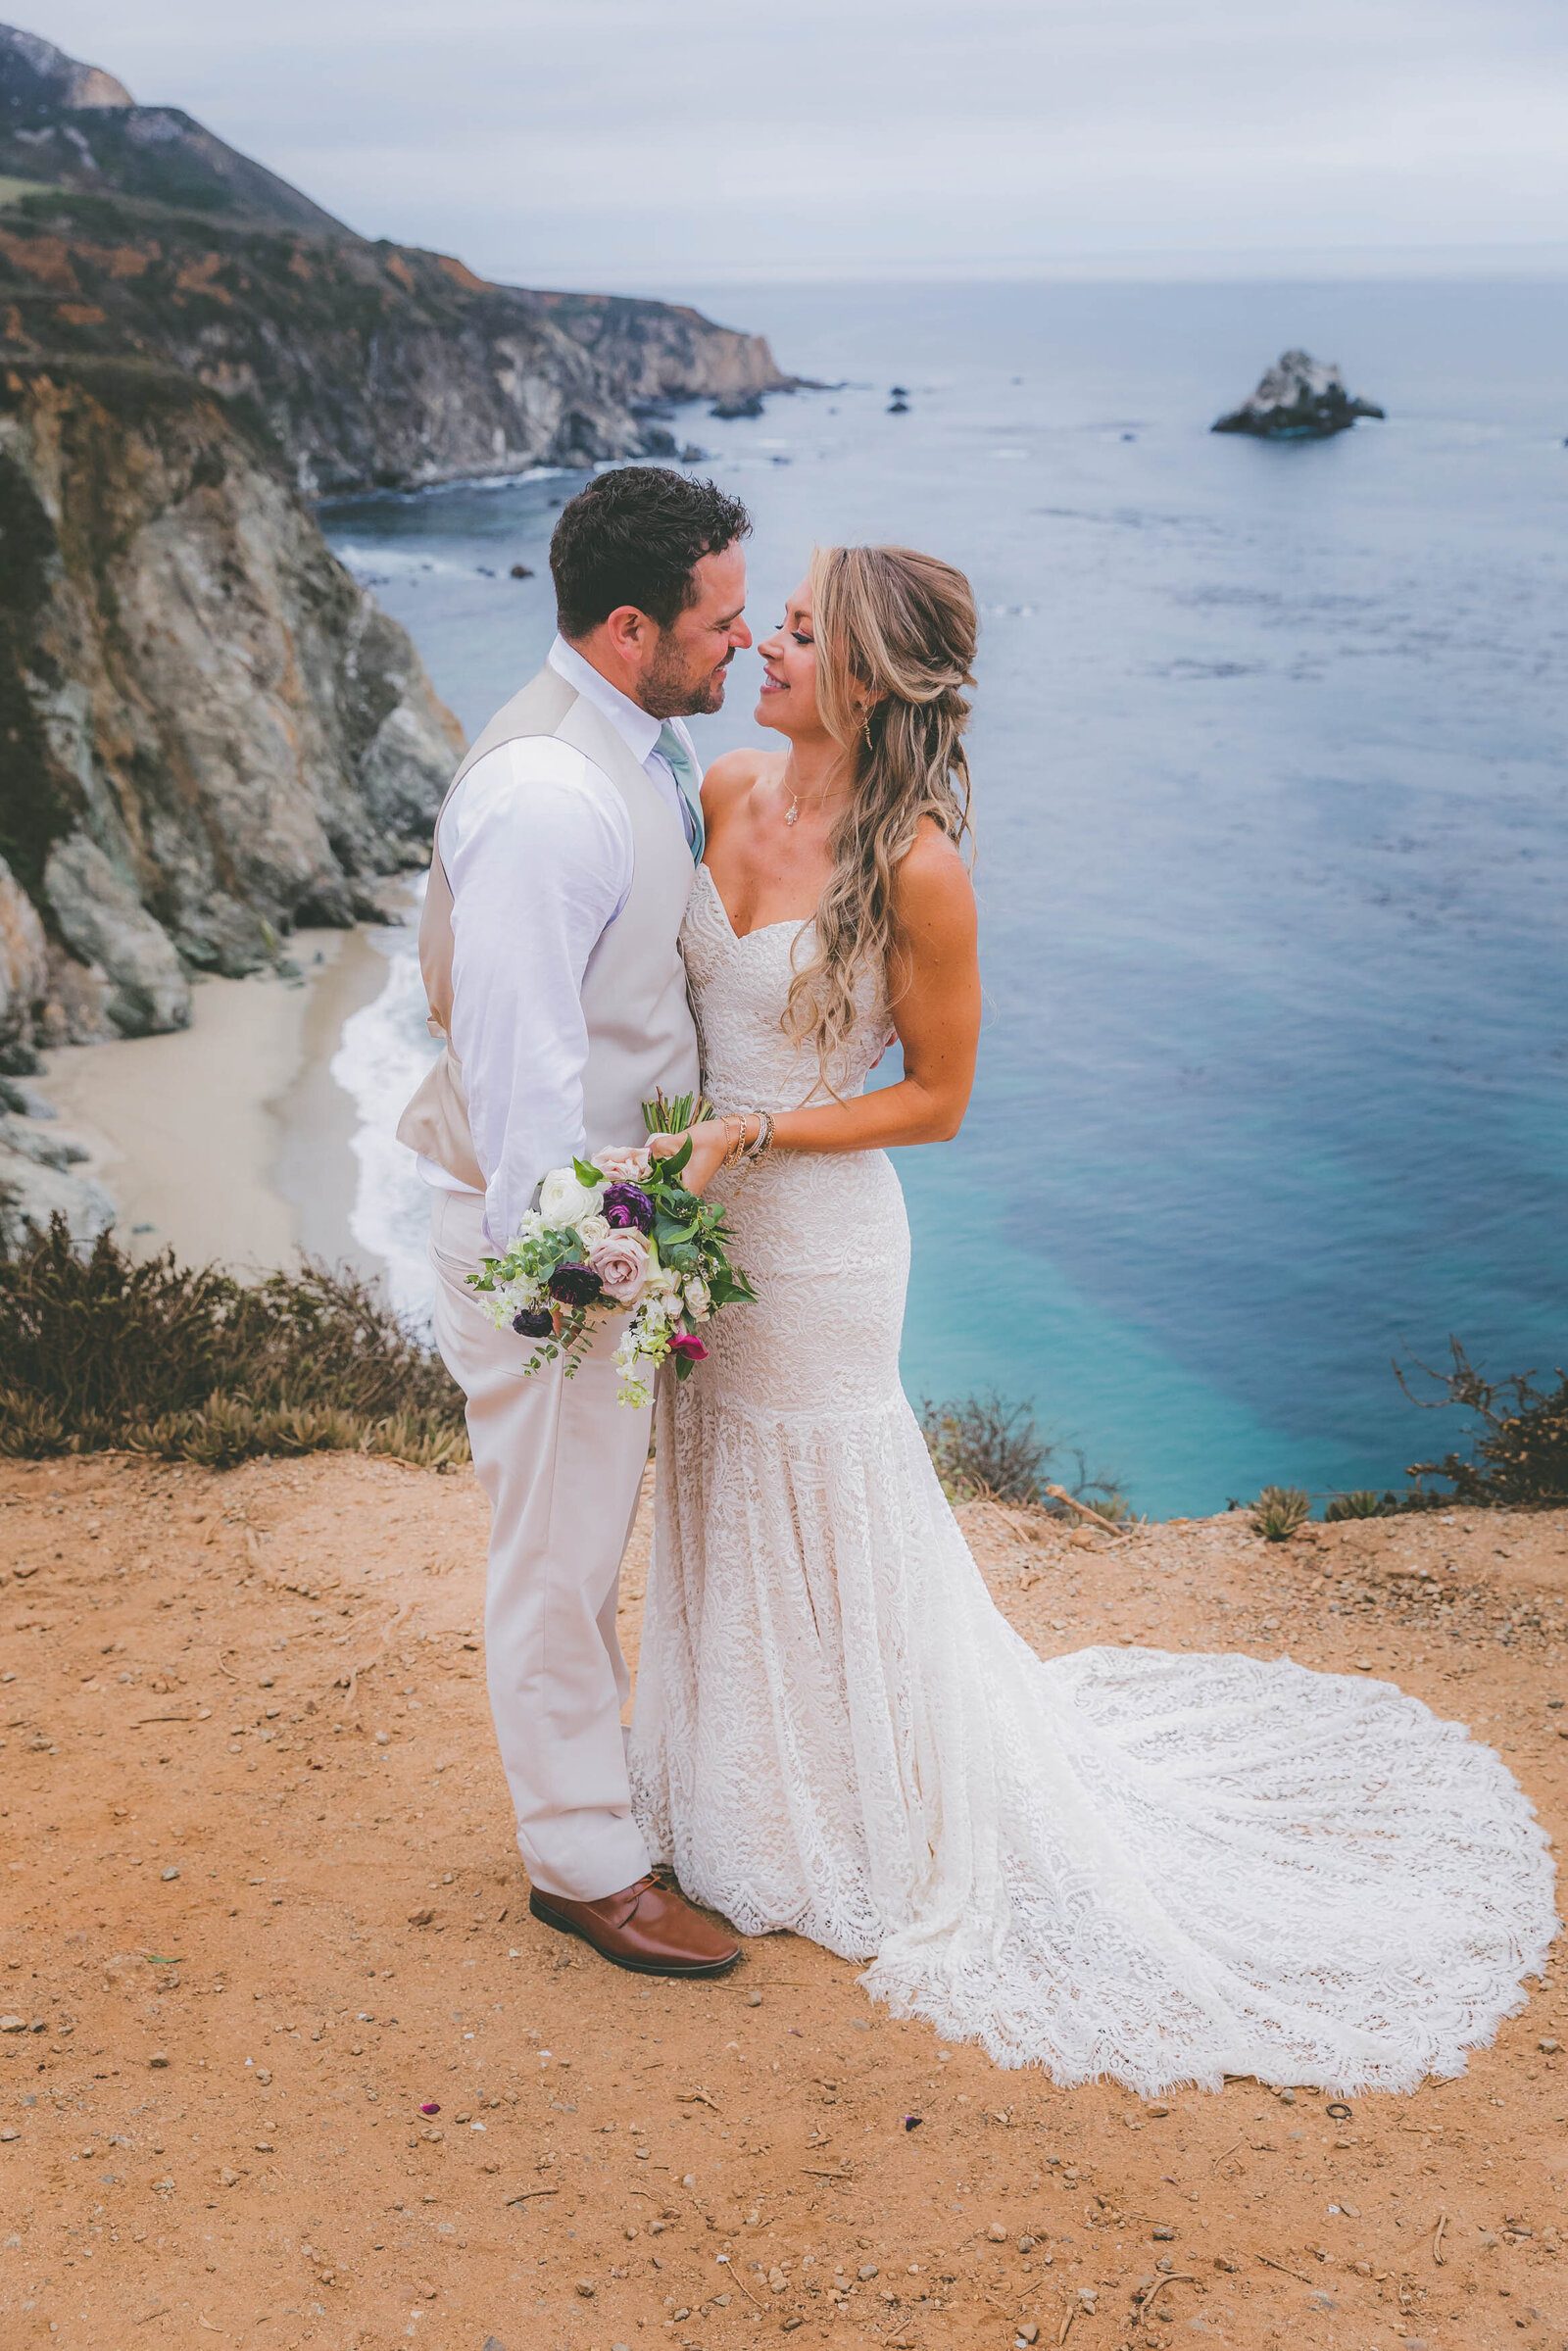 A groom and bride look into each other's eyes as they take wedding photographs at Bixby Bridge in Big Sur.